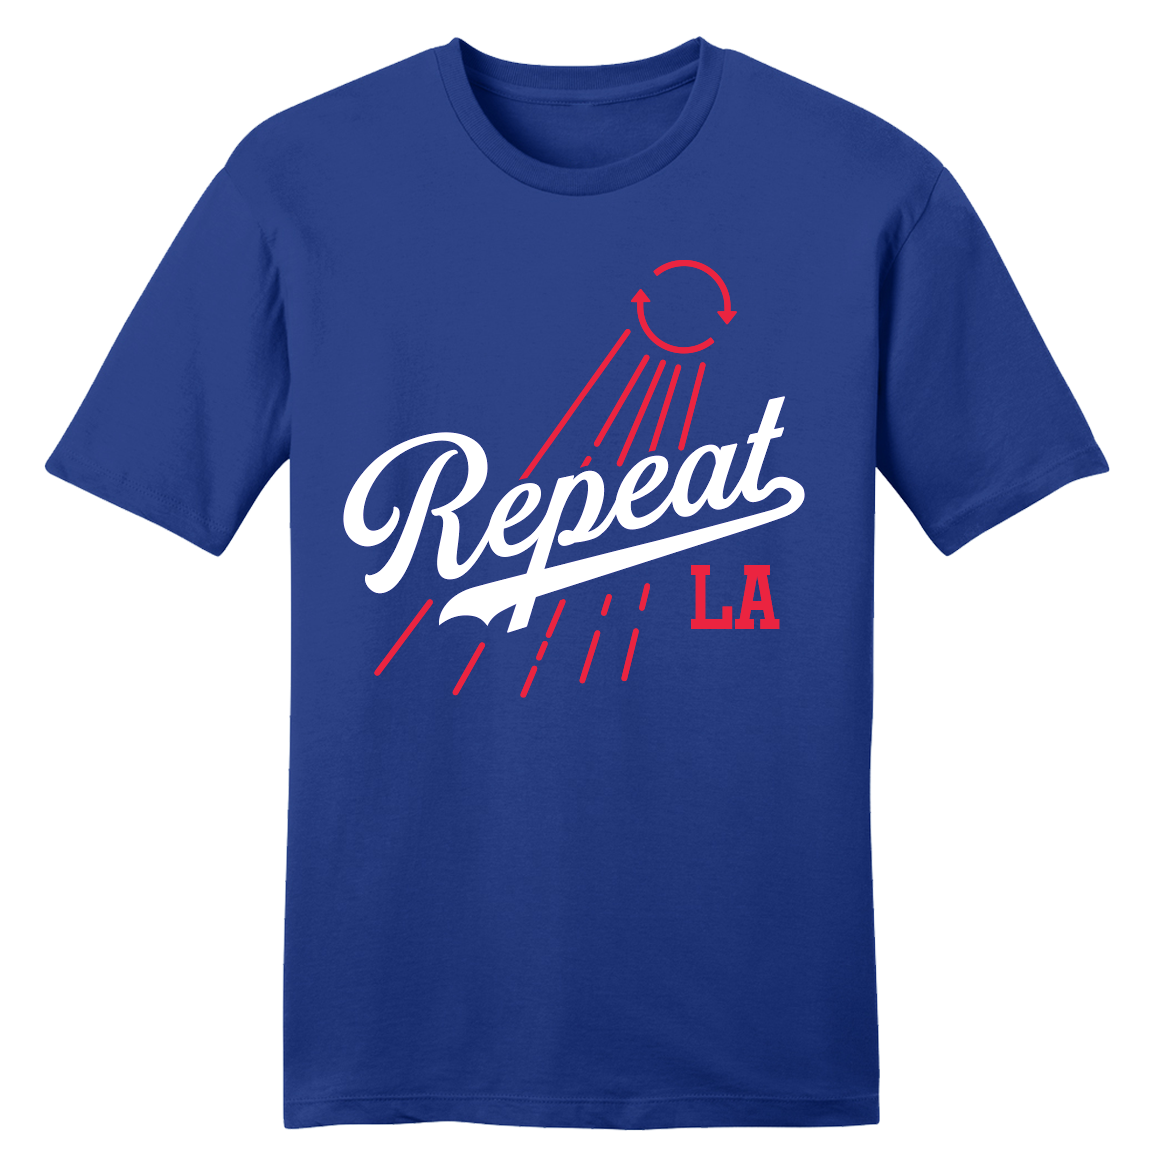 Repeat LA Rally Tee | L.A. Baseball | In The Clutch